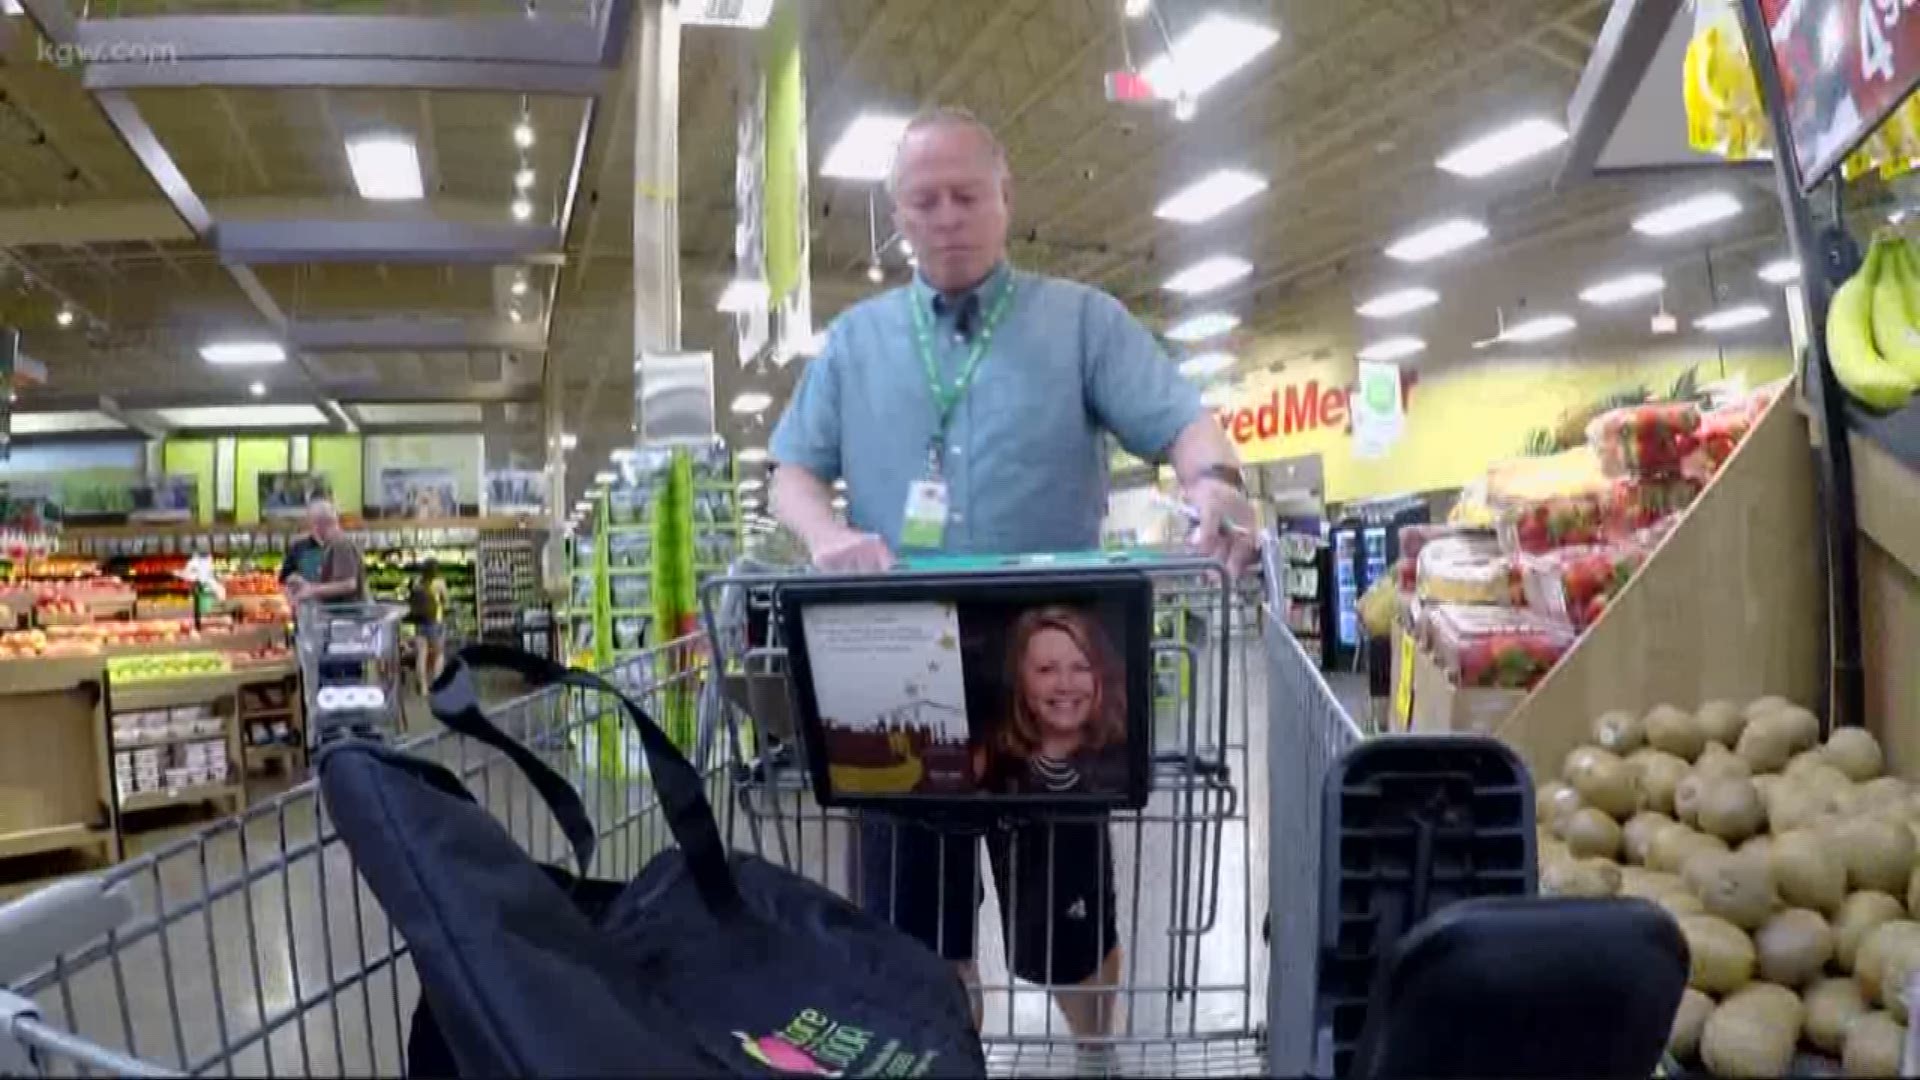 A nonprofit delivers groceries to those who can't go to the store.